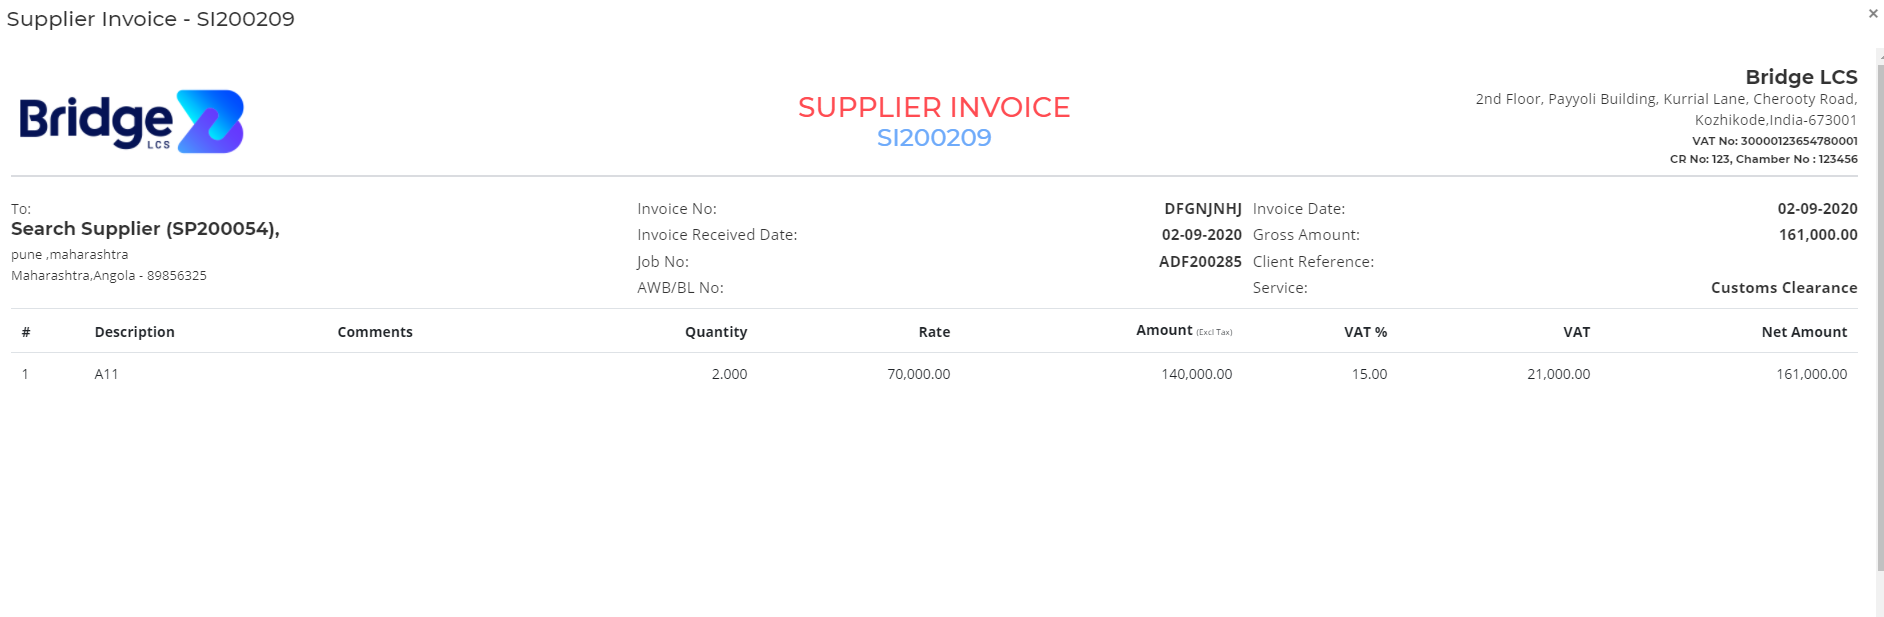 Supplier invoice in Bridge LCS Logistics Software For Small Business